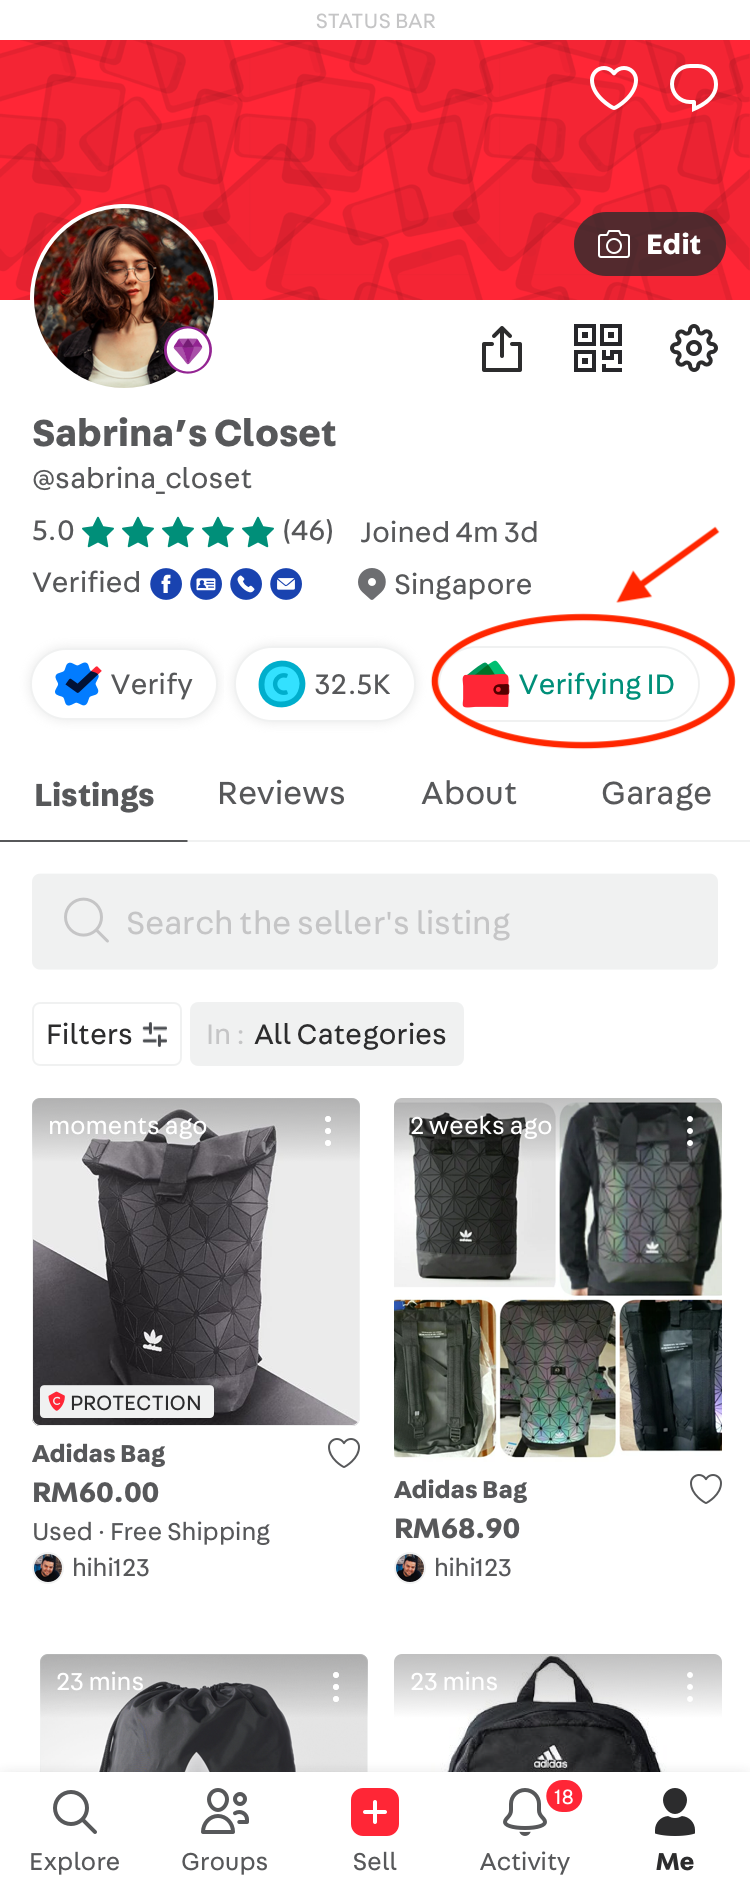 profile-verifying-seller-my.png